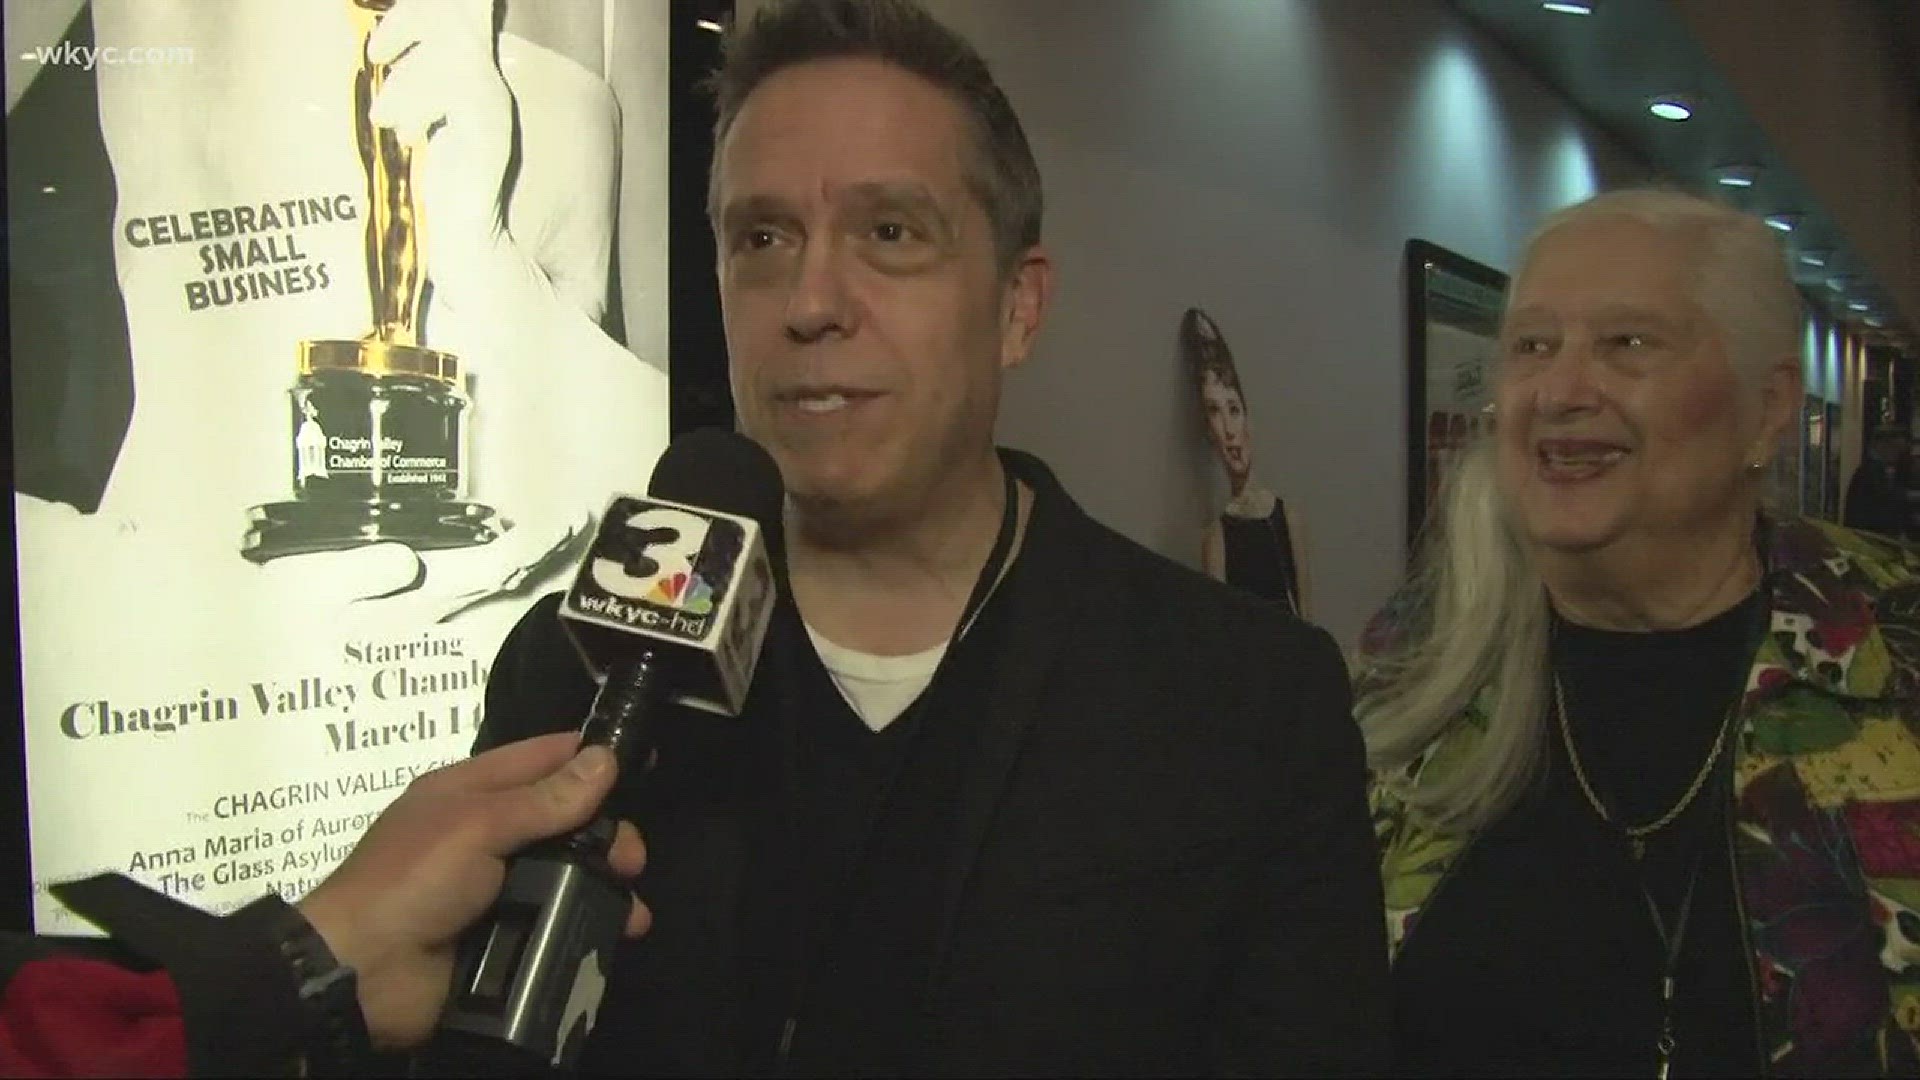 Chagrin Falls native Lee Unkrich returns home after 2nd Oscar win